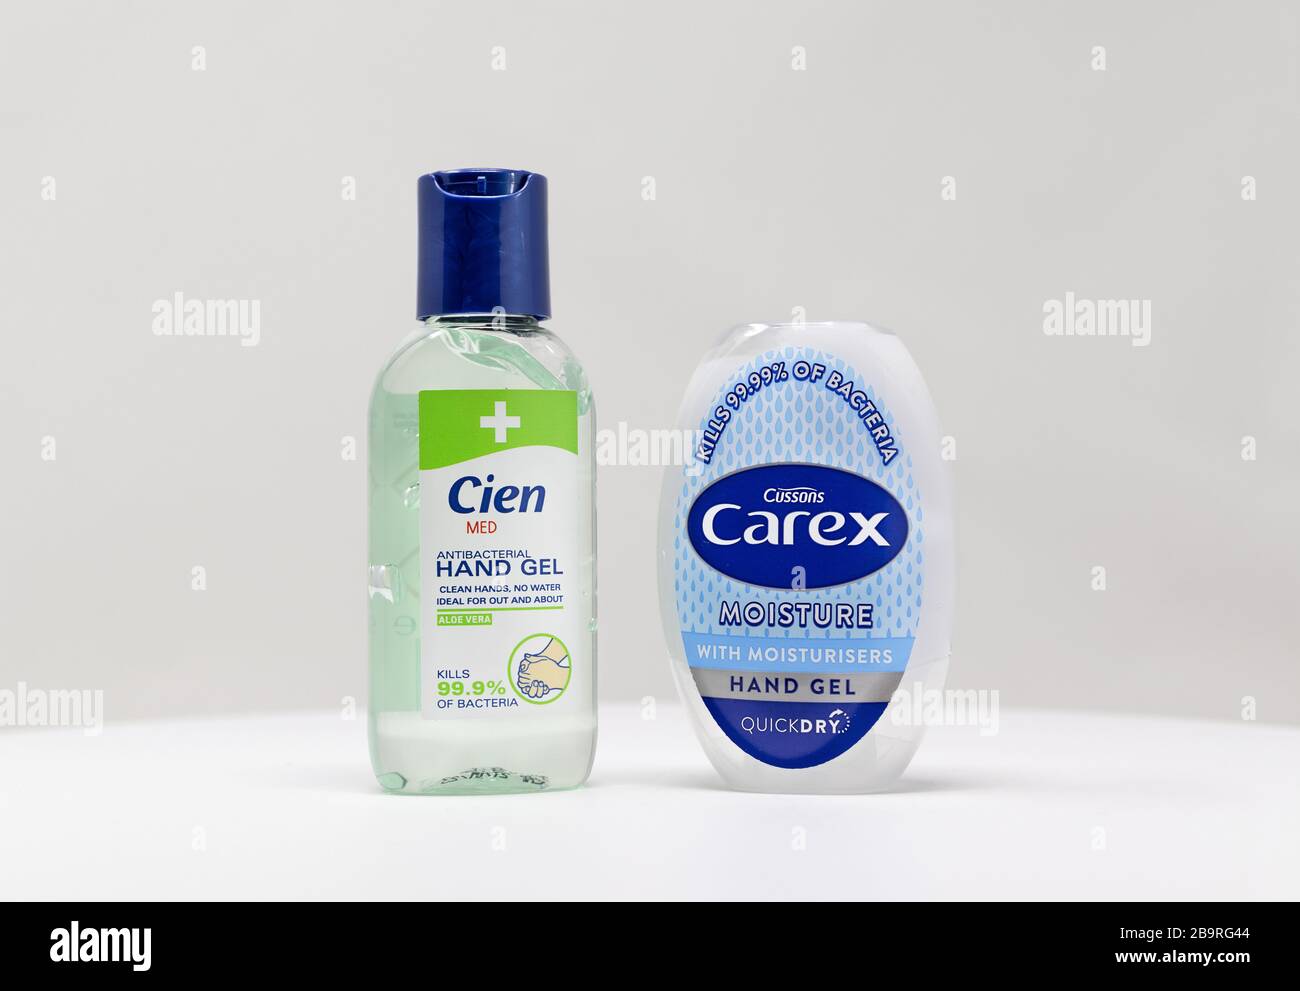 London / UK - March 22nd 2020 - Two bottles of antibacterial hand sanitiser gel from Carex and Cien brands on a white background Stock Photo